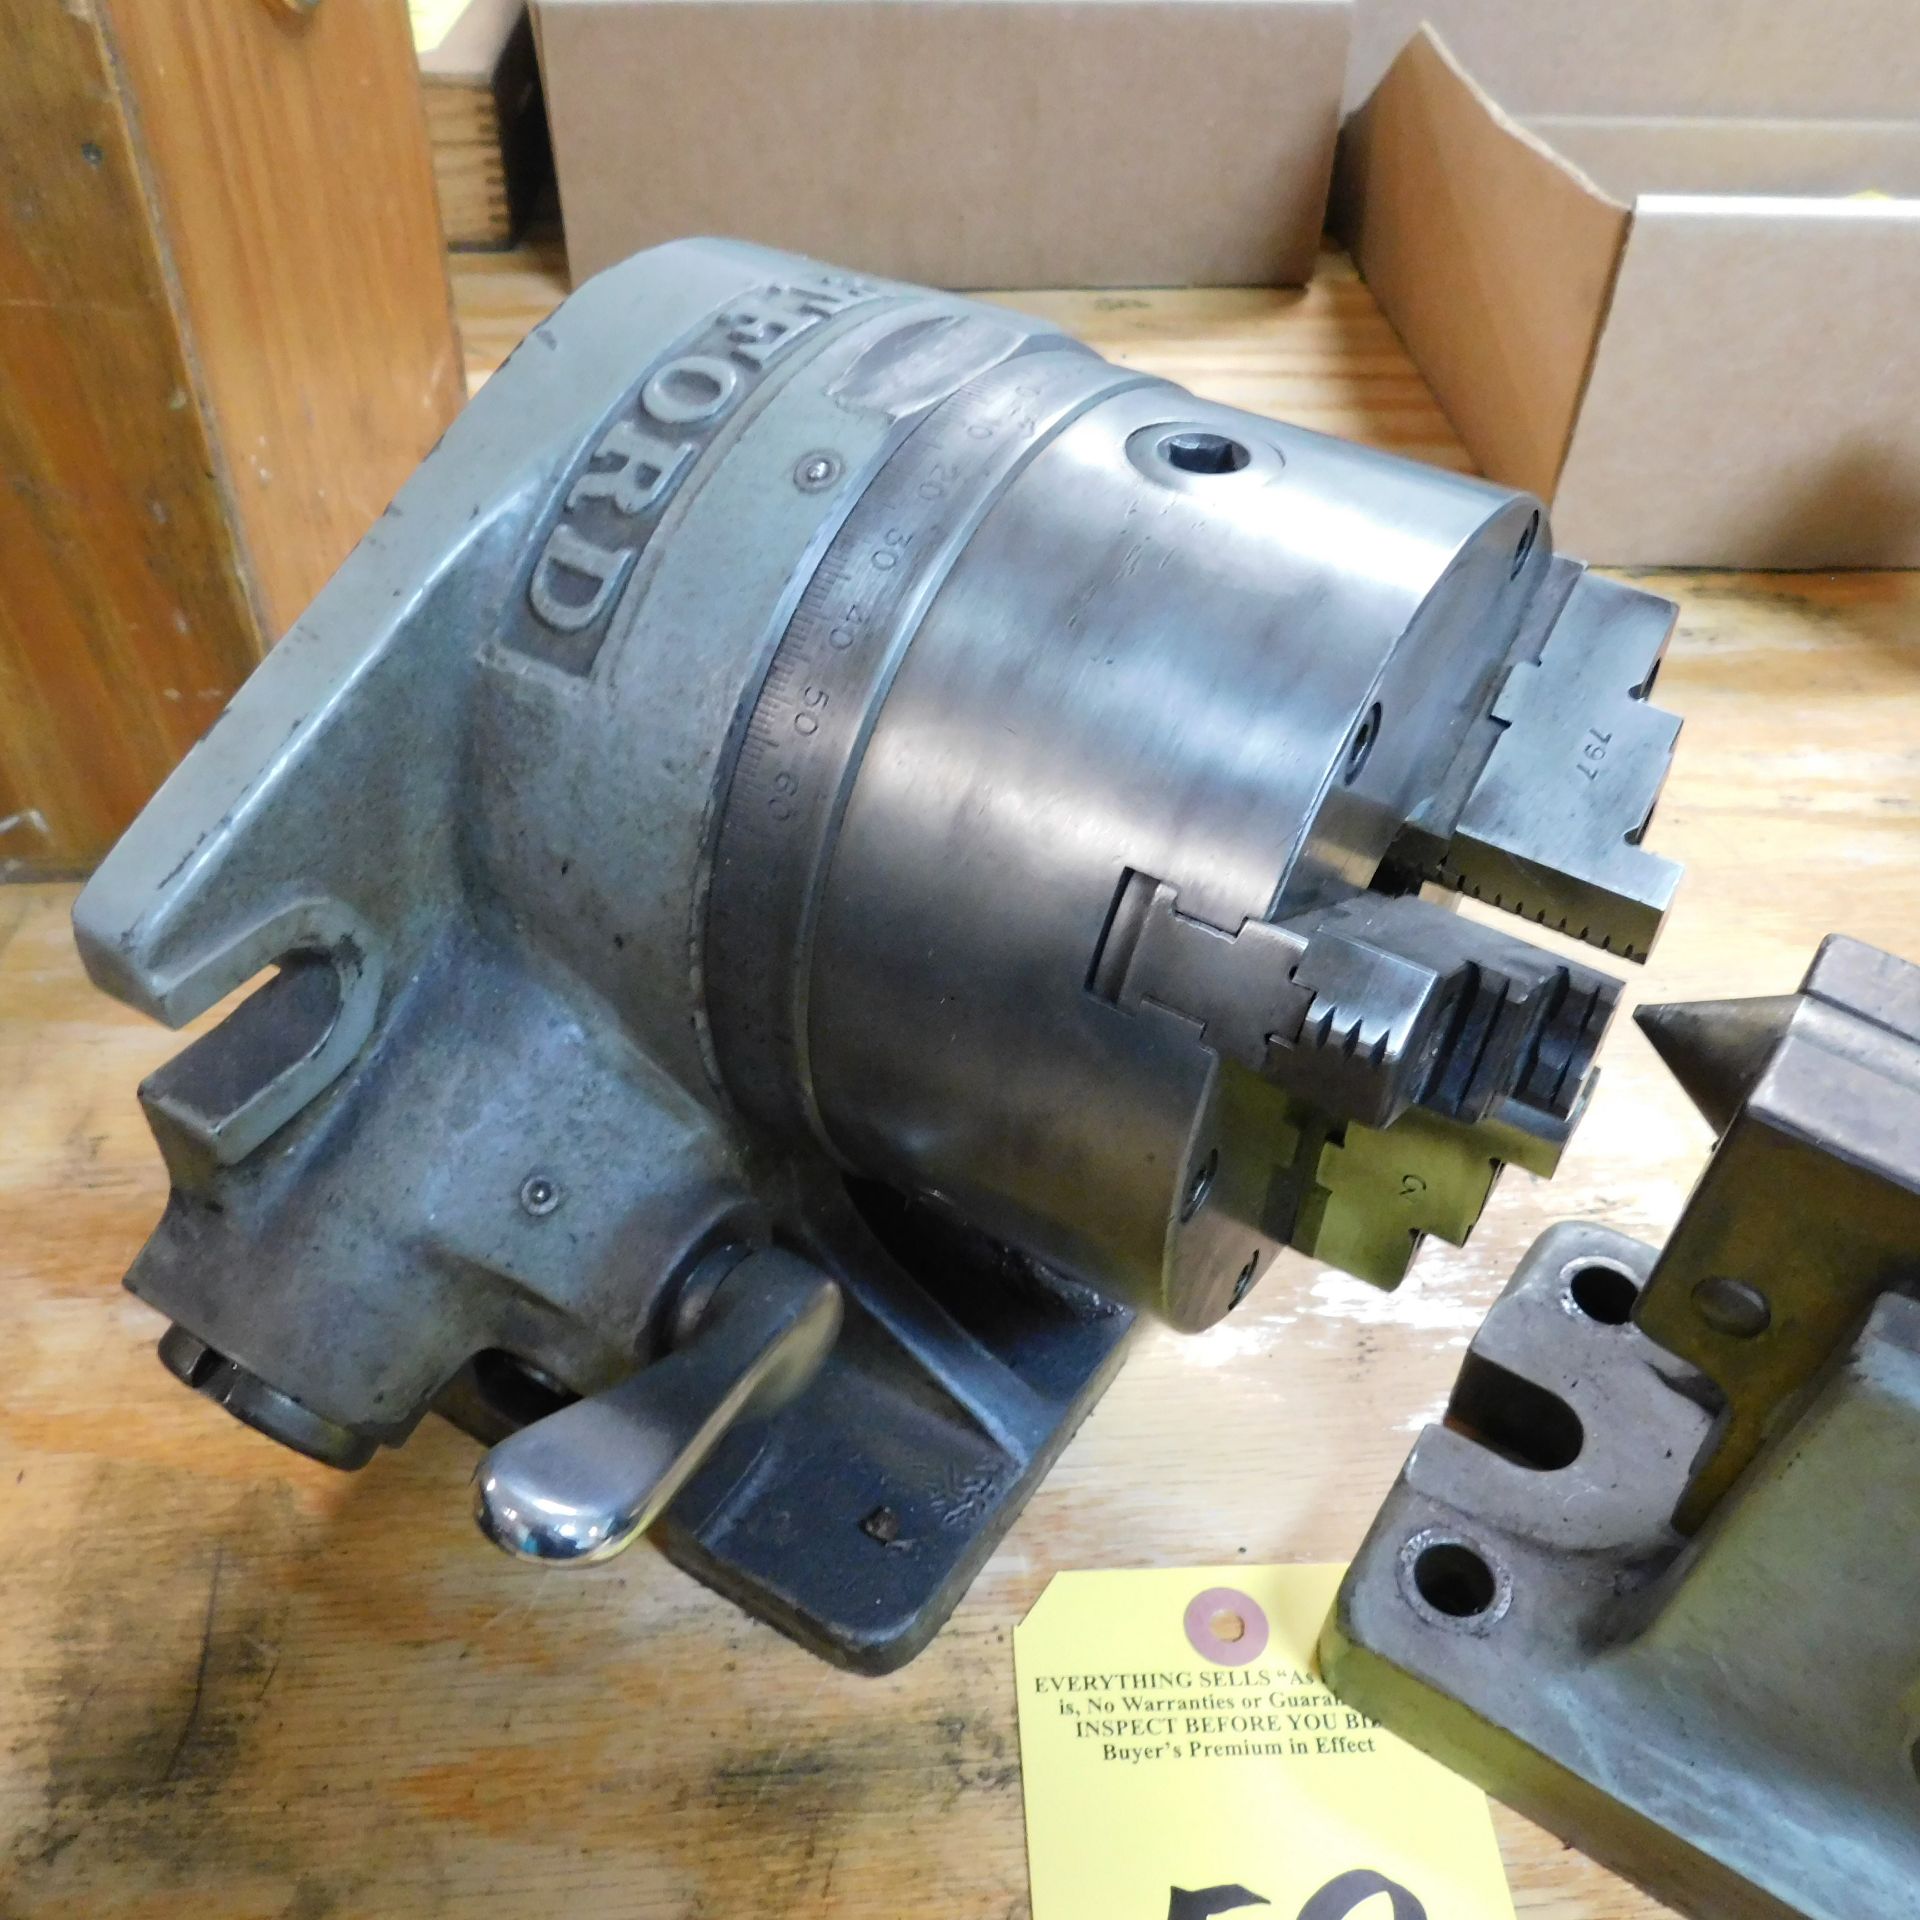 Hartford Indexer with 5" 3-Jaw Chuck and Tailstock - Image 2 of 3